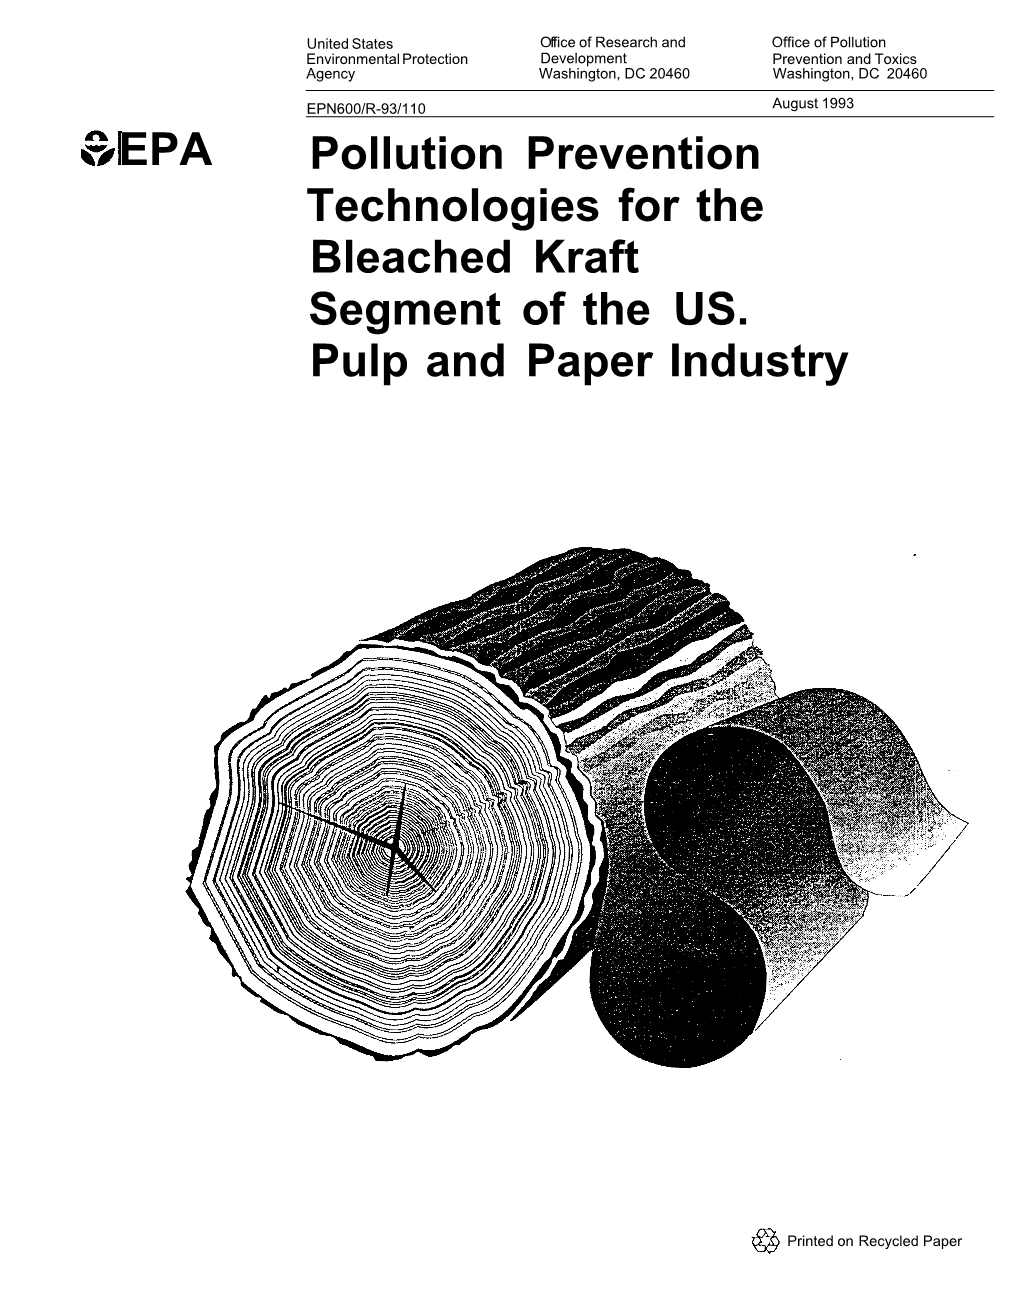 Pollution Prevention Technologies for the Bleached Kraft Segment of the US